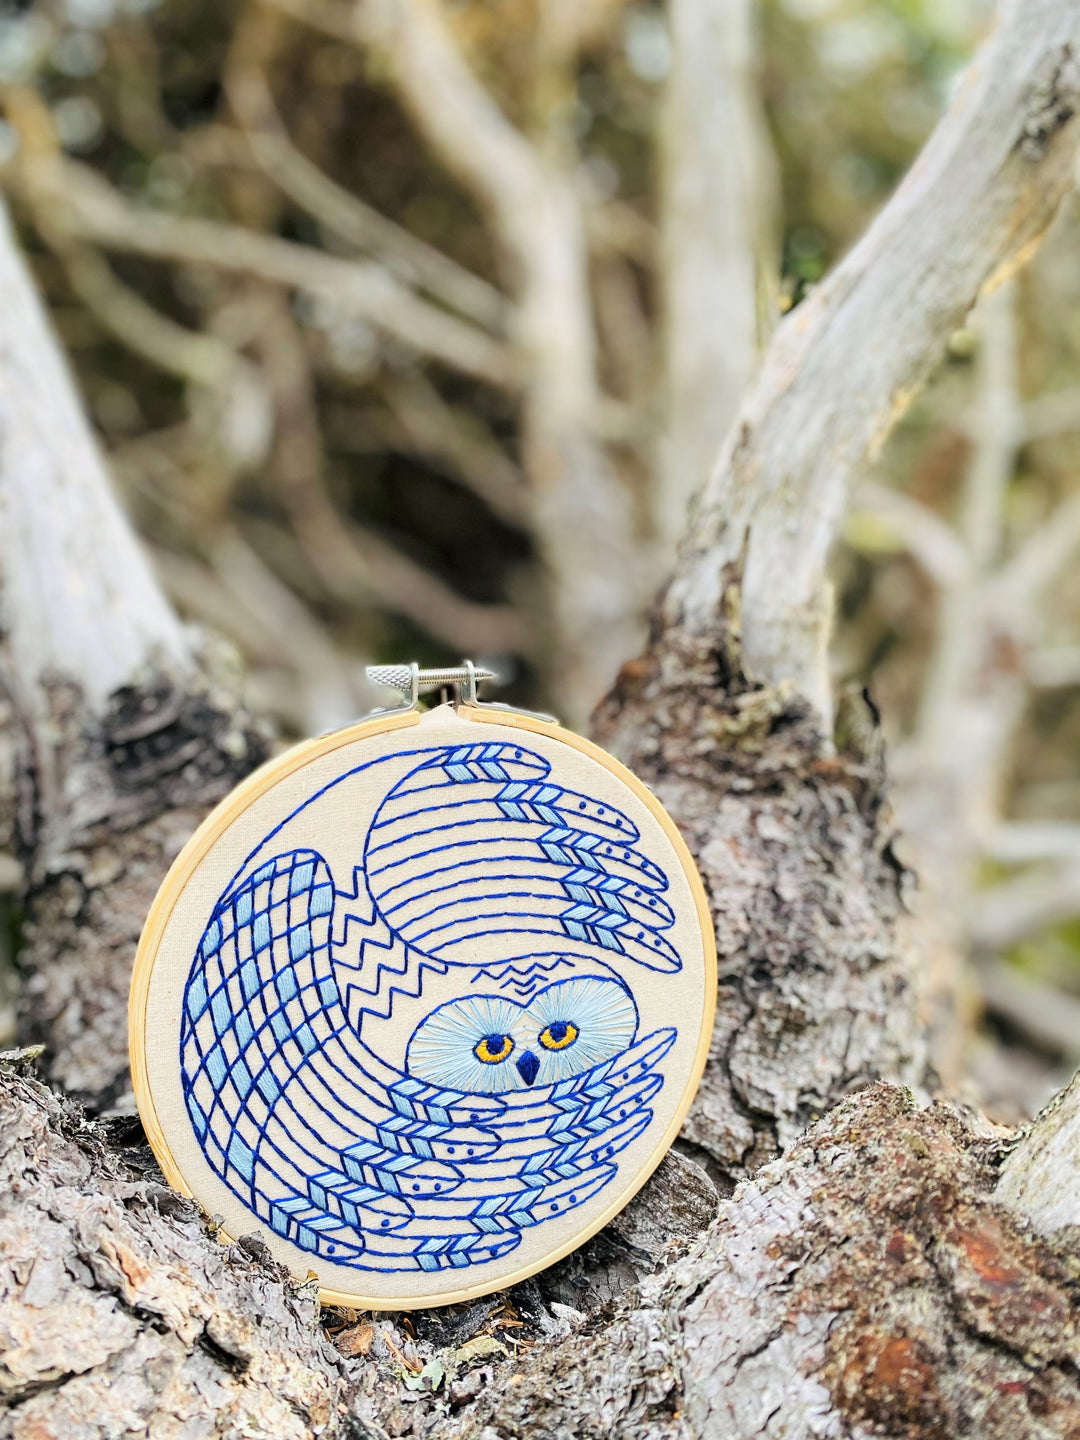 Craftermoon - NEW! Snowy Owl Complete Embroidery Kit 4